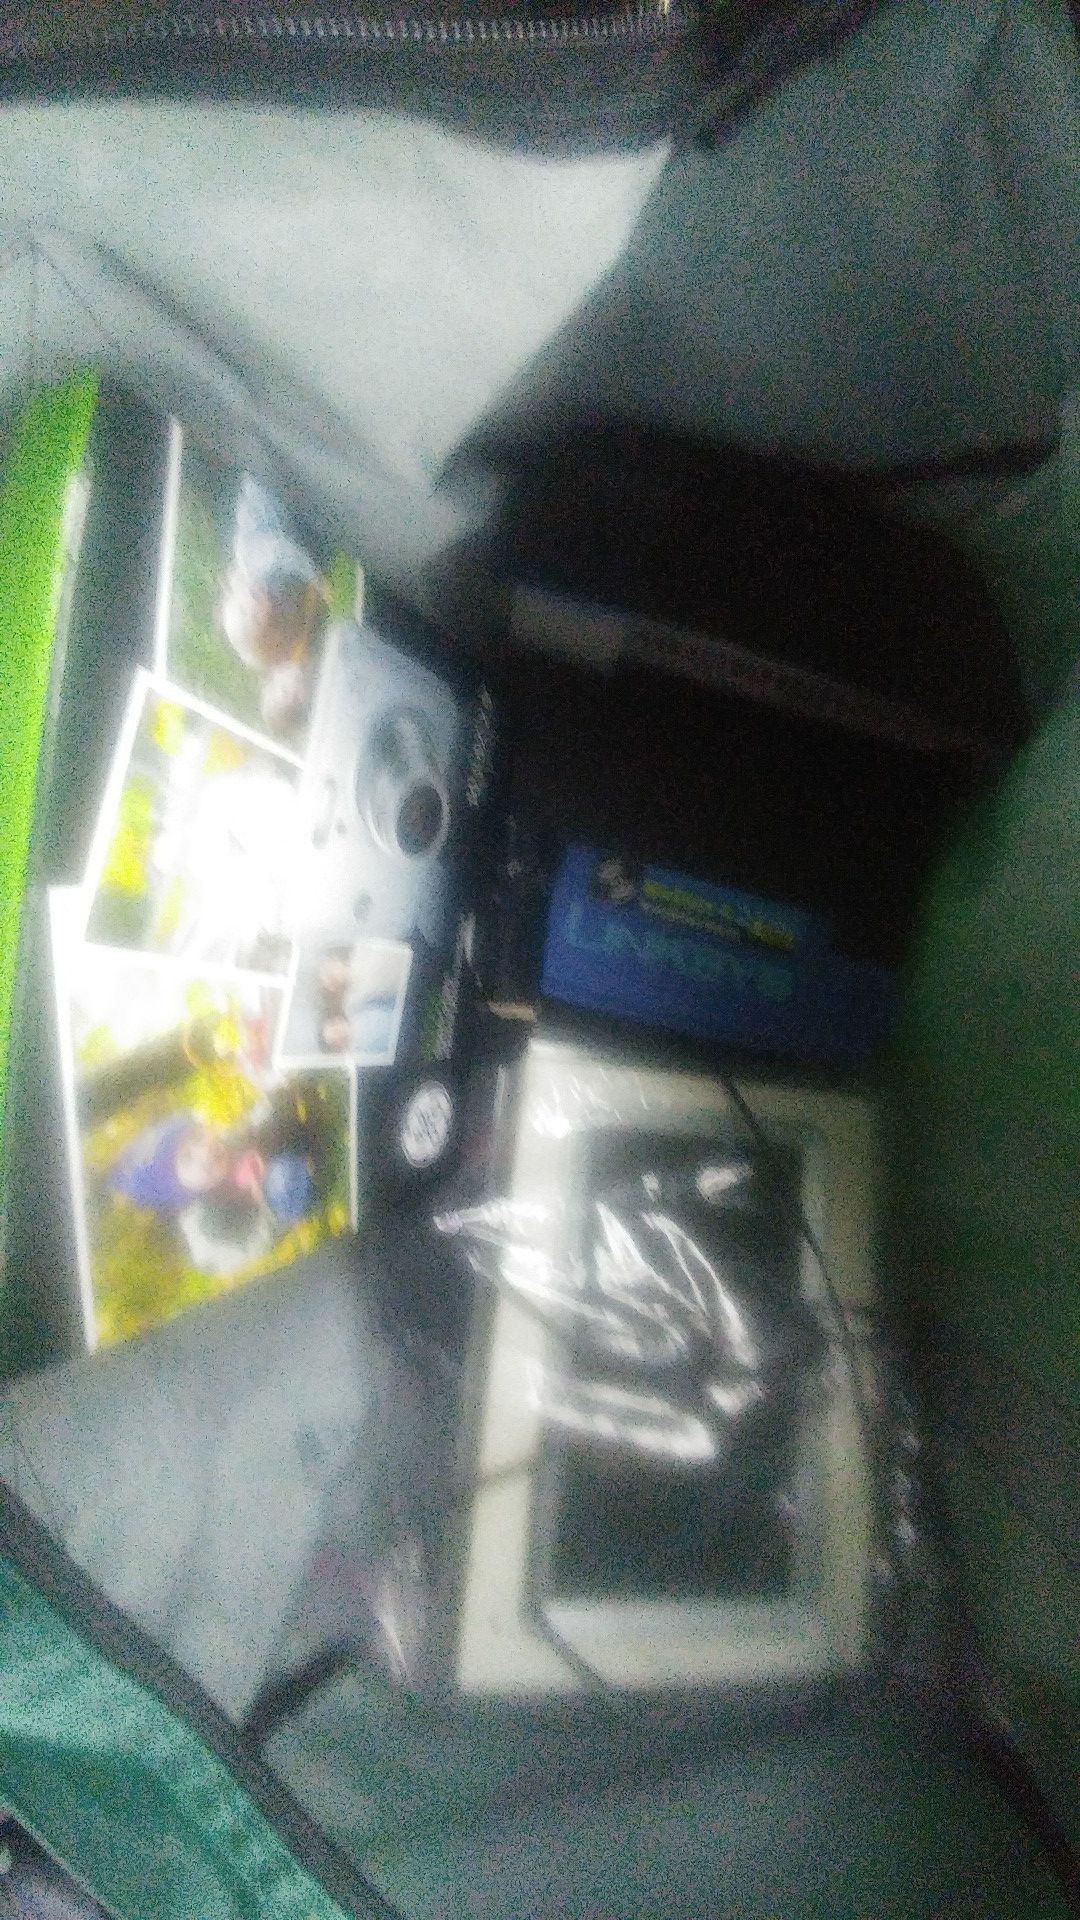 $15 for everything. 2 wireless routers, digital camera,digital pic frame,turtle beach headset